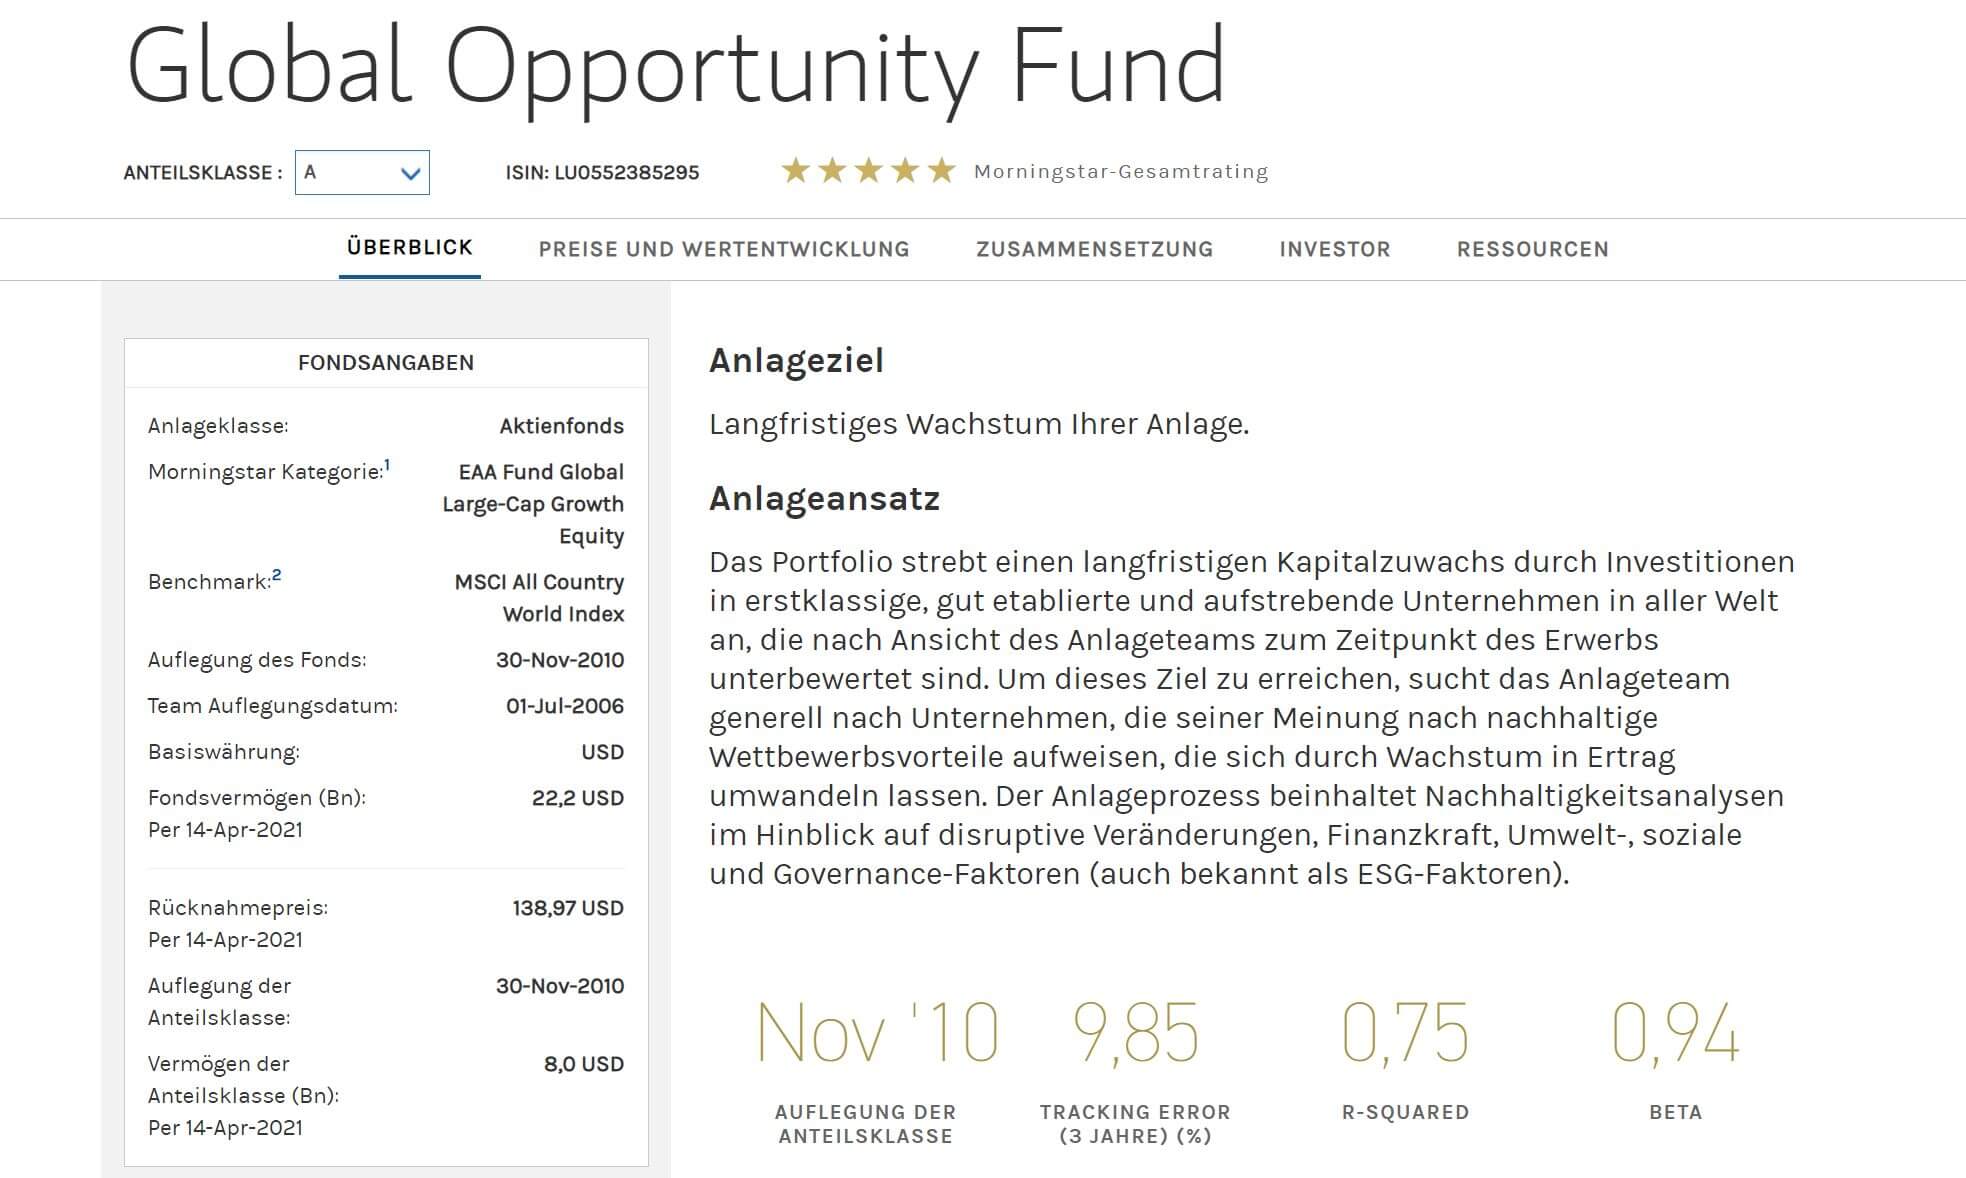 Morgan Stanley Global Opportunity Fund